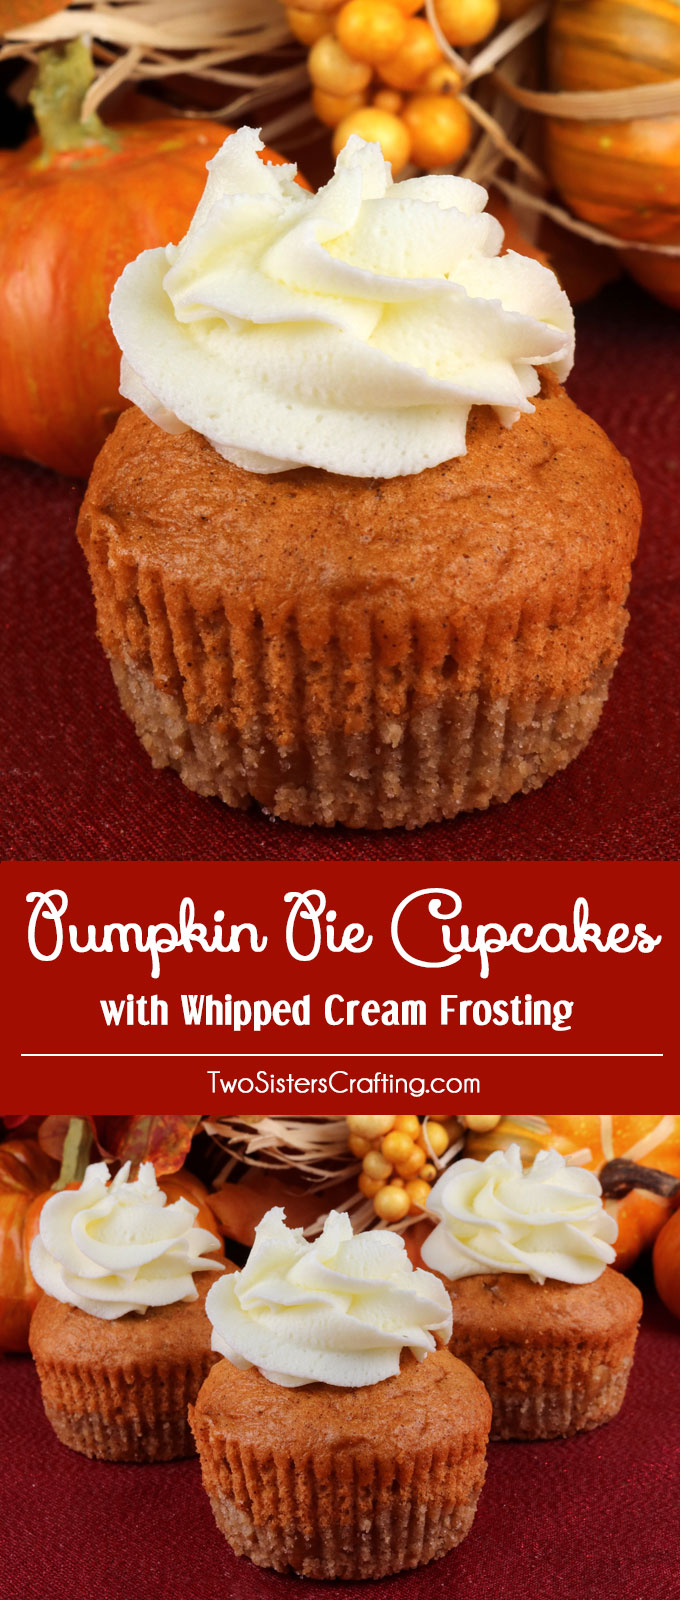 Pumpkin Pie Cupcakes, by Two Sisters